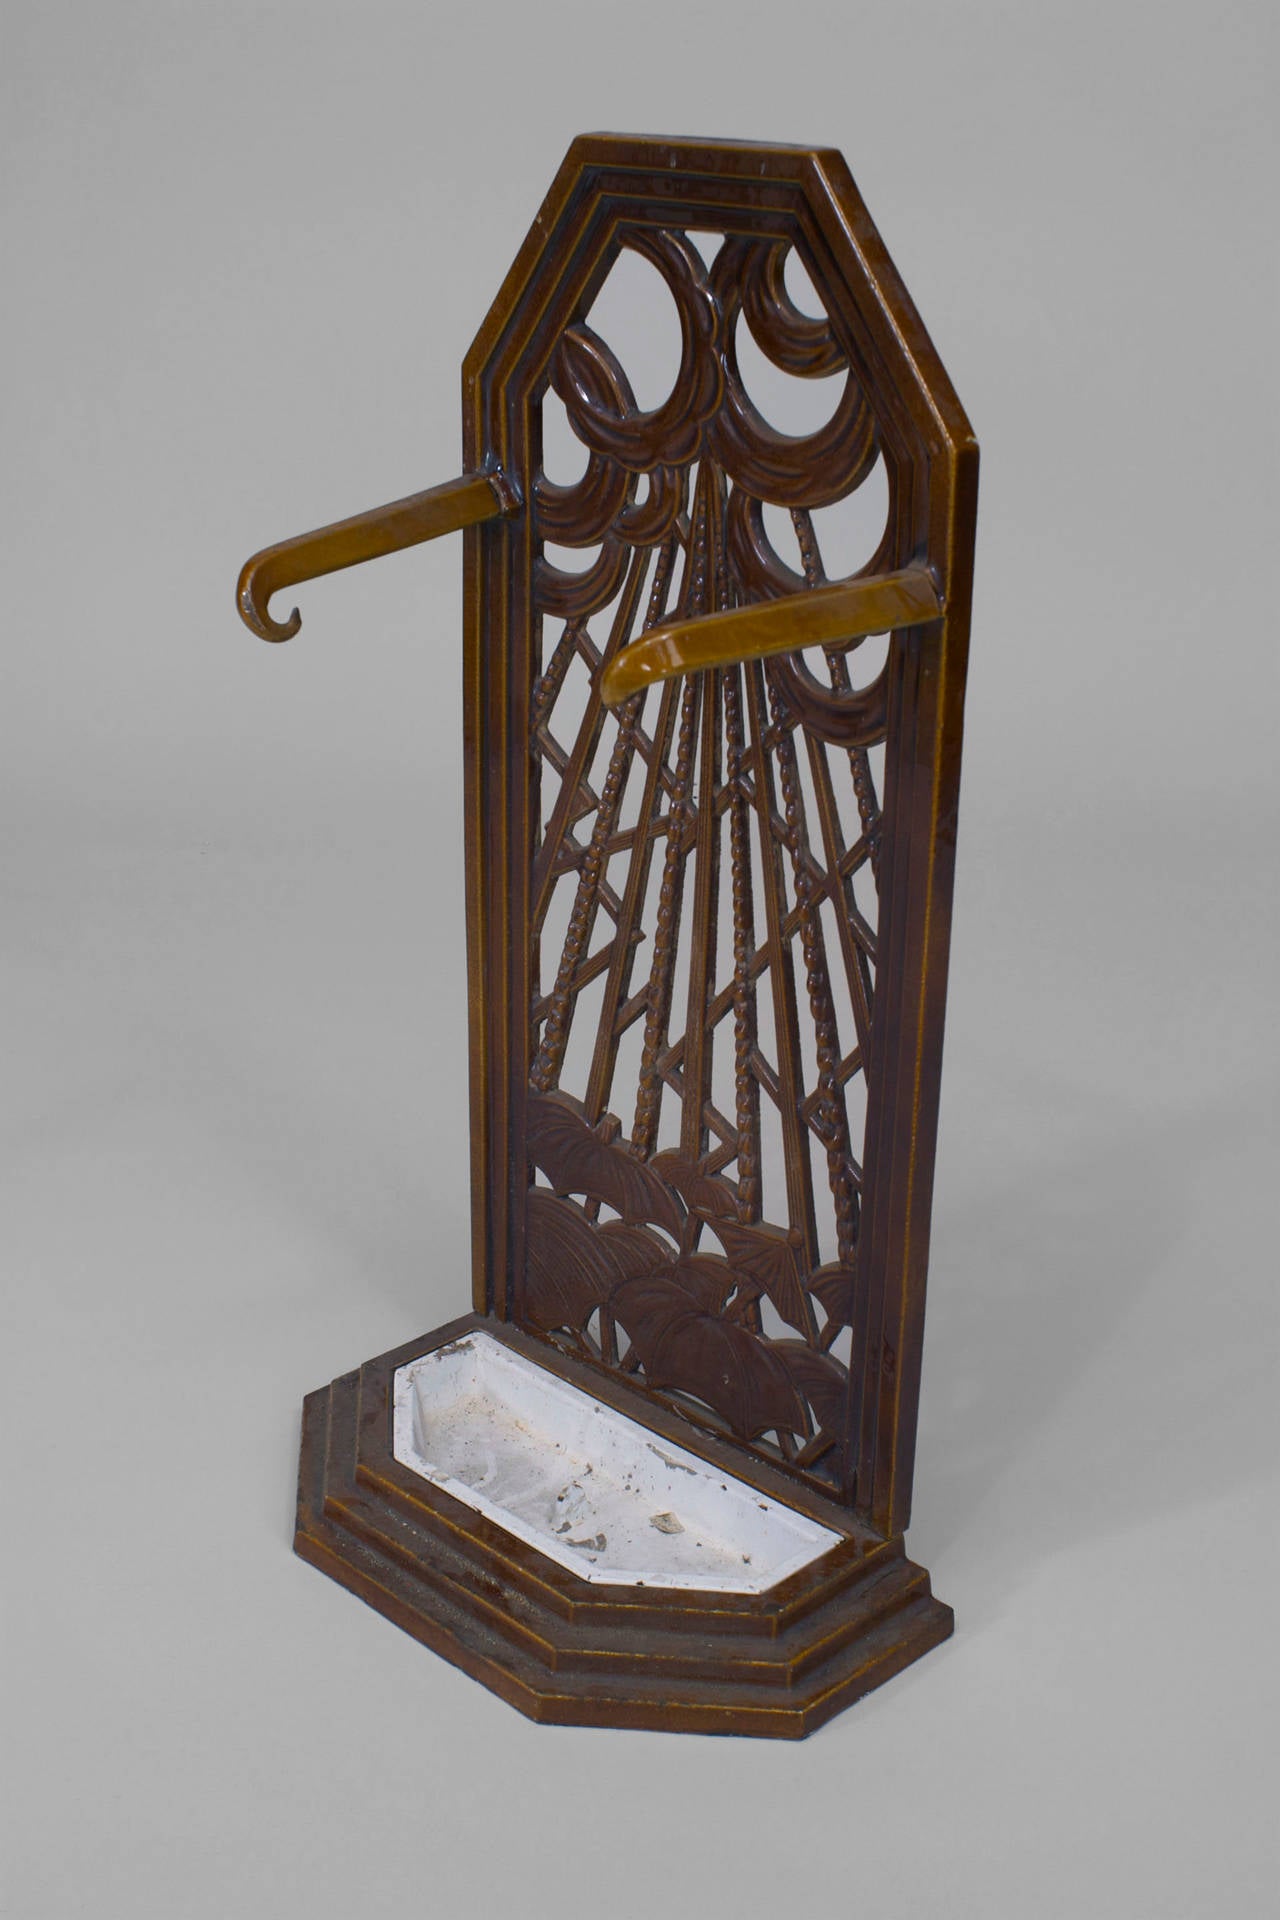 French Art Deco brown porcelain umbrella stand with filigree back design of clouds, rain, and umbrellas with 2 side hooks and a loose white bottom tray.
 